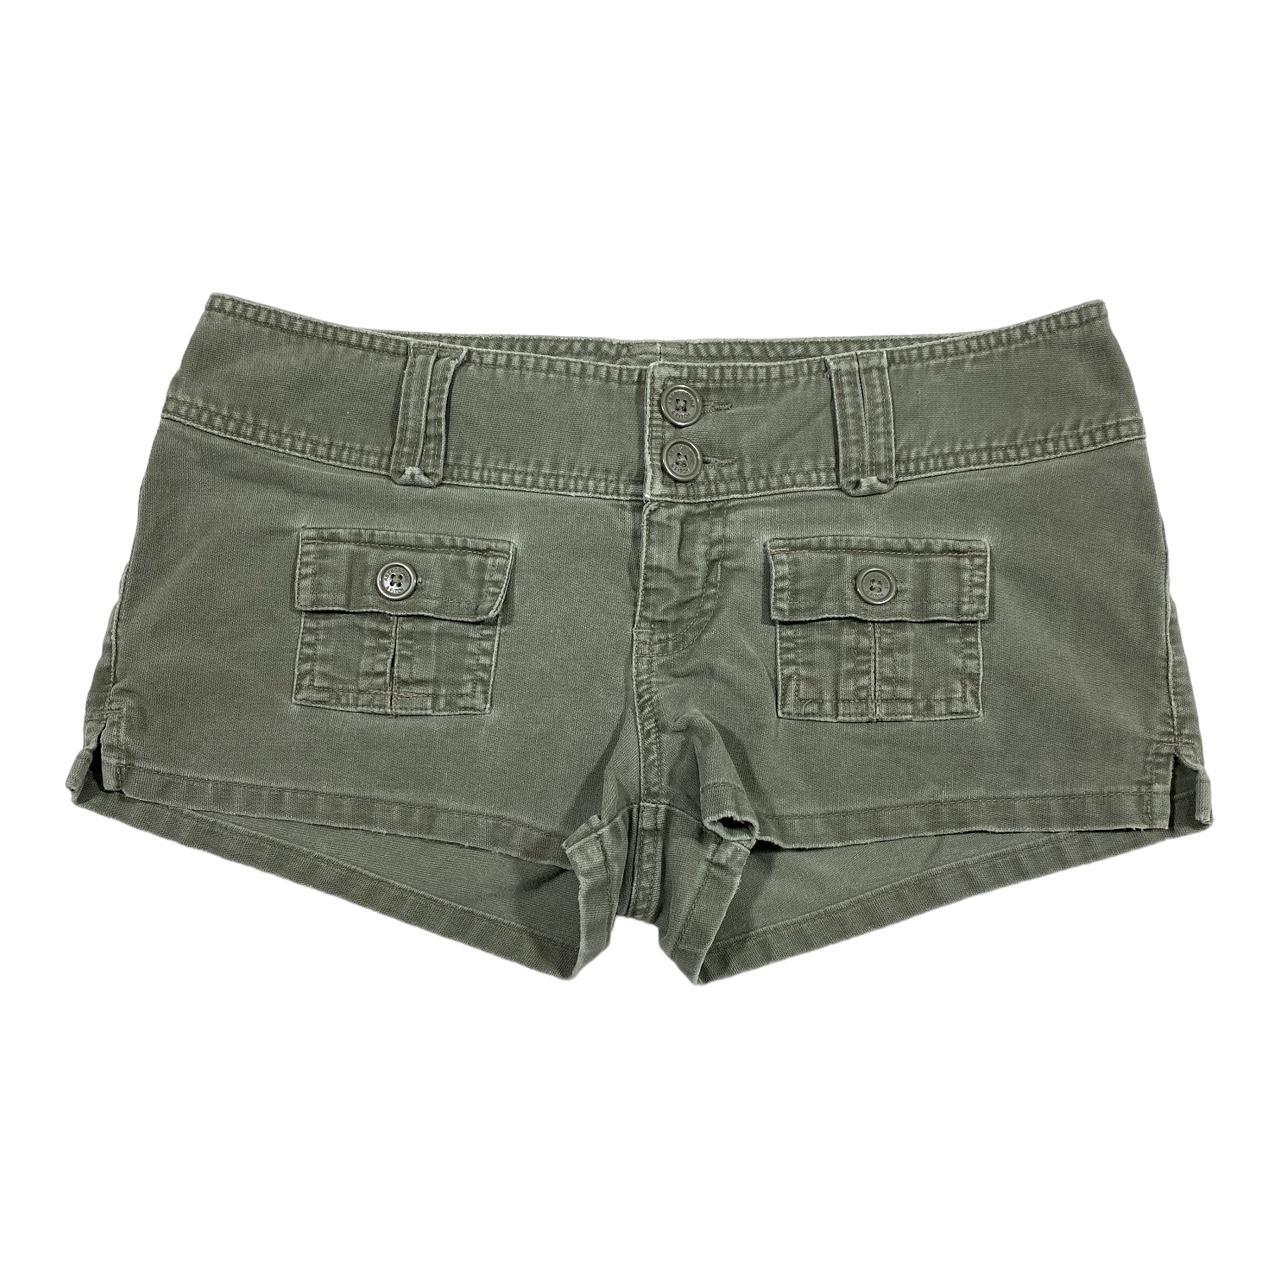 Abercrombie & Fitch Women's Green and Khaki Shorts | Depop